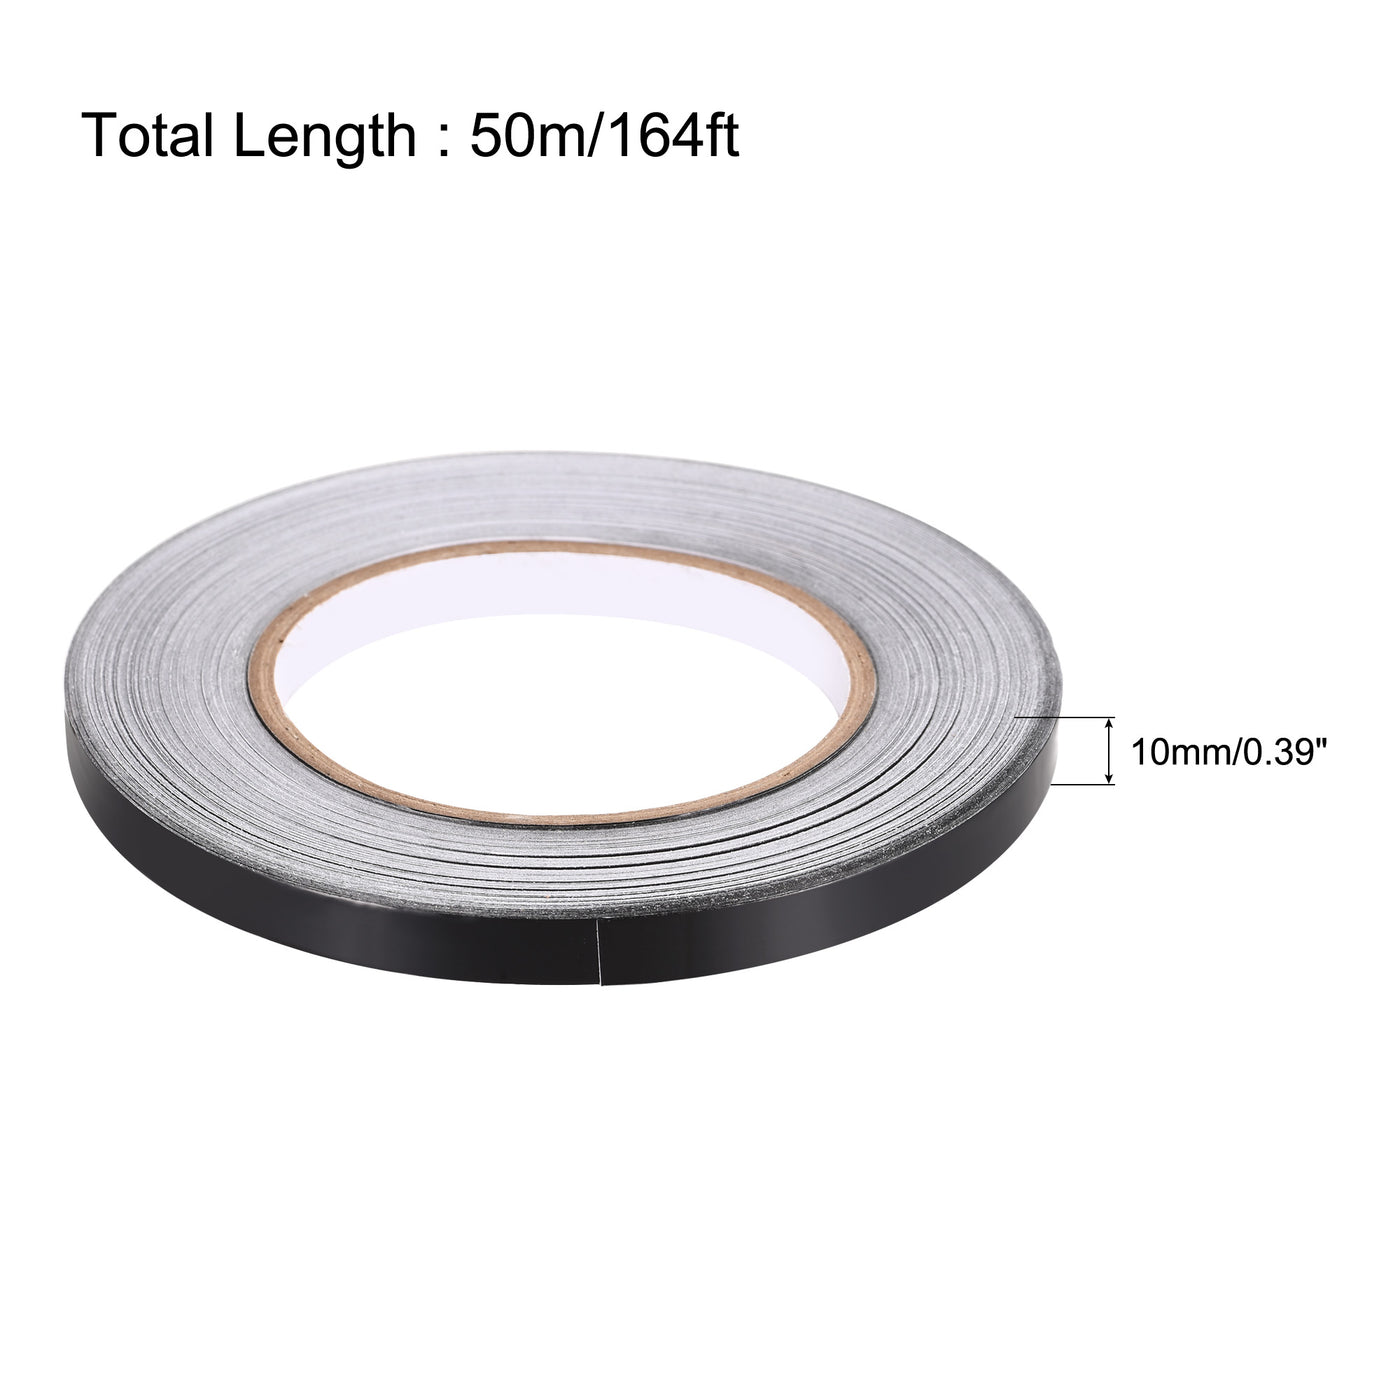 uxcell Uxcell 10mm Aluminum Foil Tape for HVAC, Patching Hot and Blocking light 50m/164ft